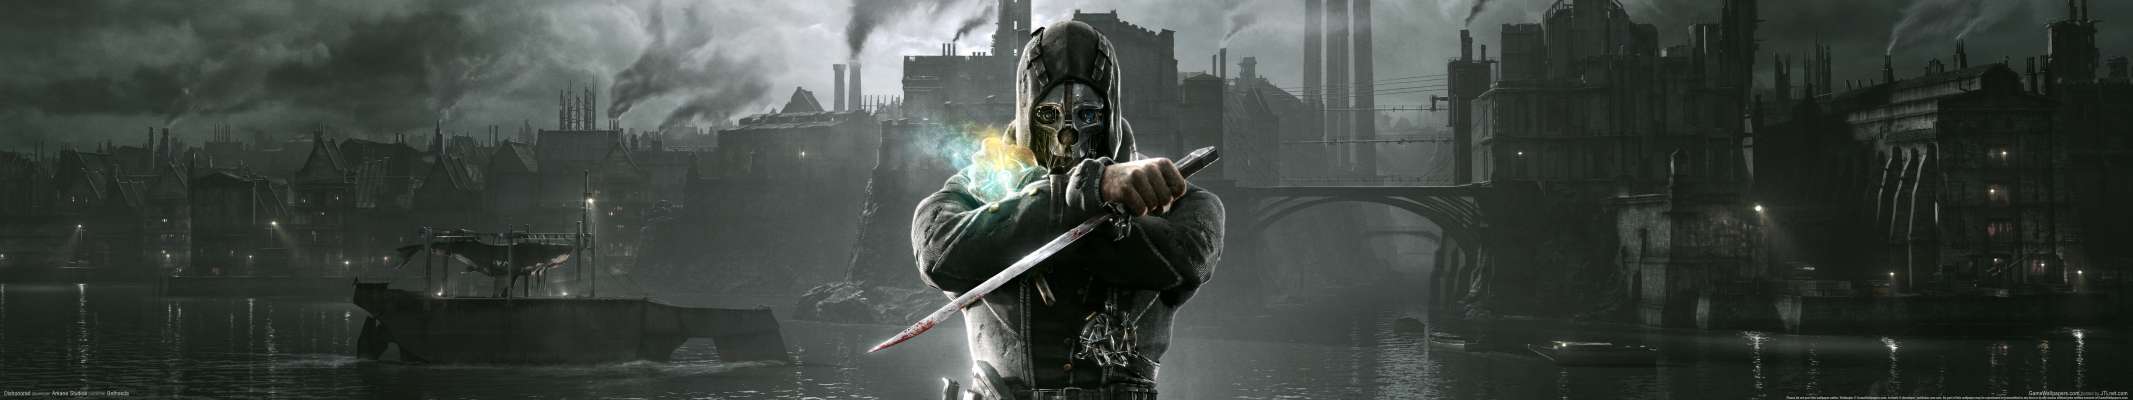 Dishonored triple screen wallpaper or background